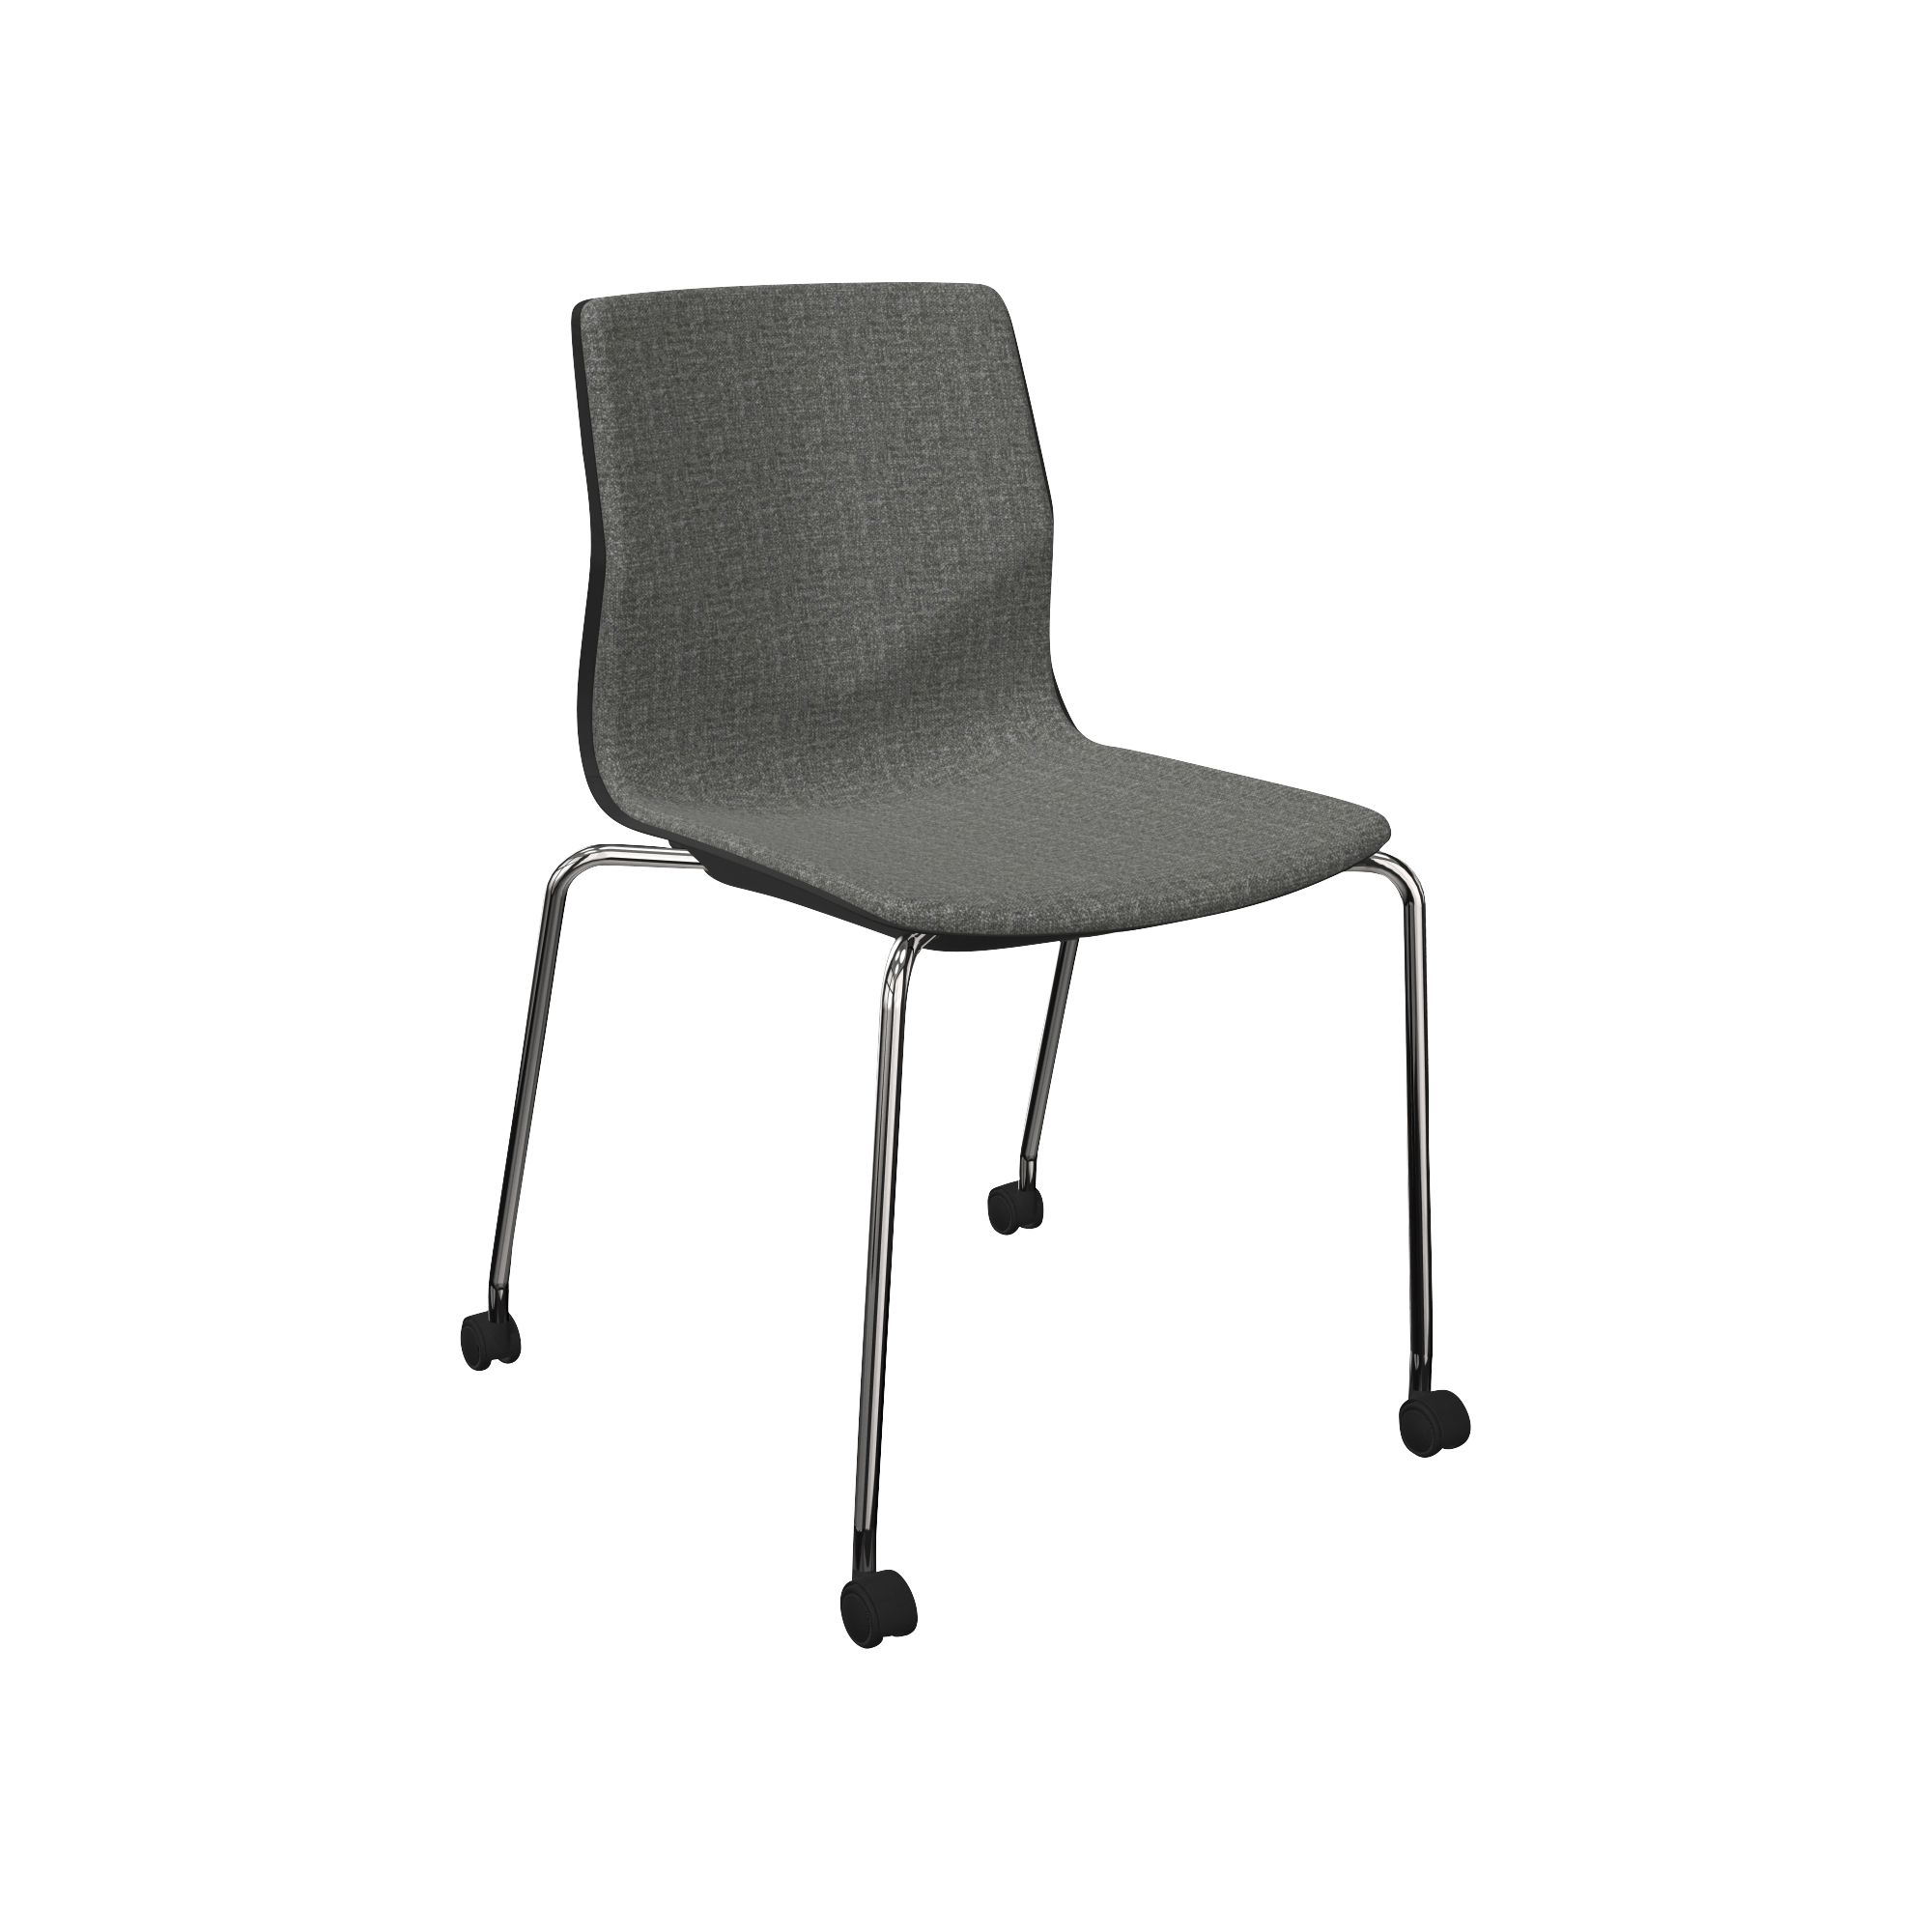 A grey chair with wheels